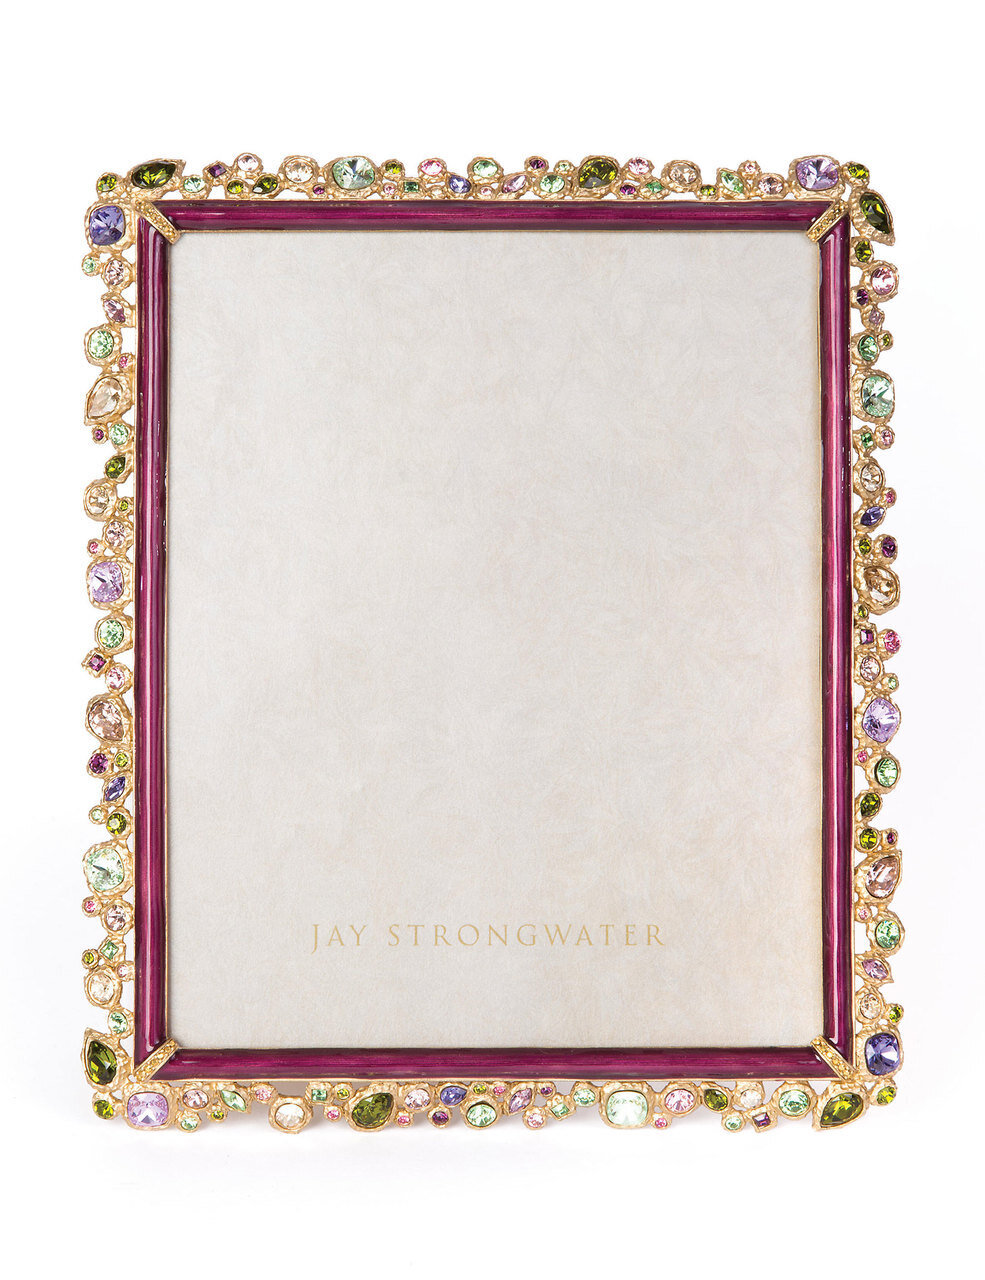 Jay Strongwater Theo Bejeweled 8 x 10 Inch Picture Frame Bouquet SPF5843-289